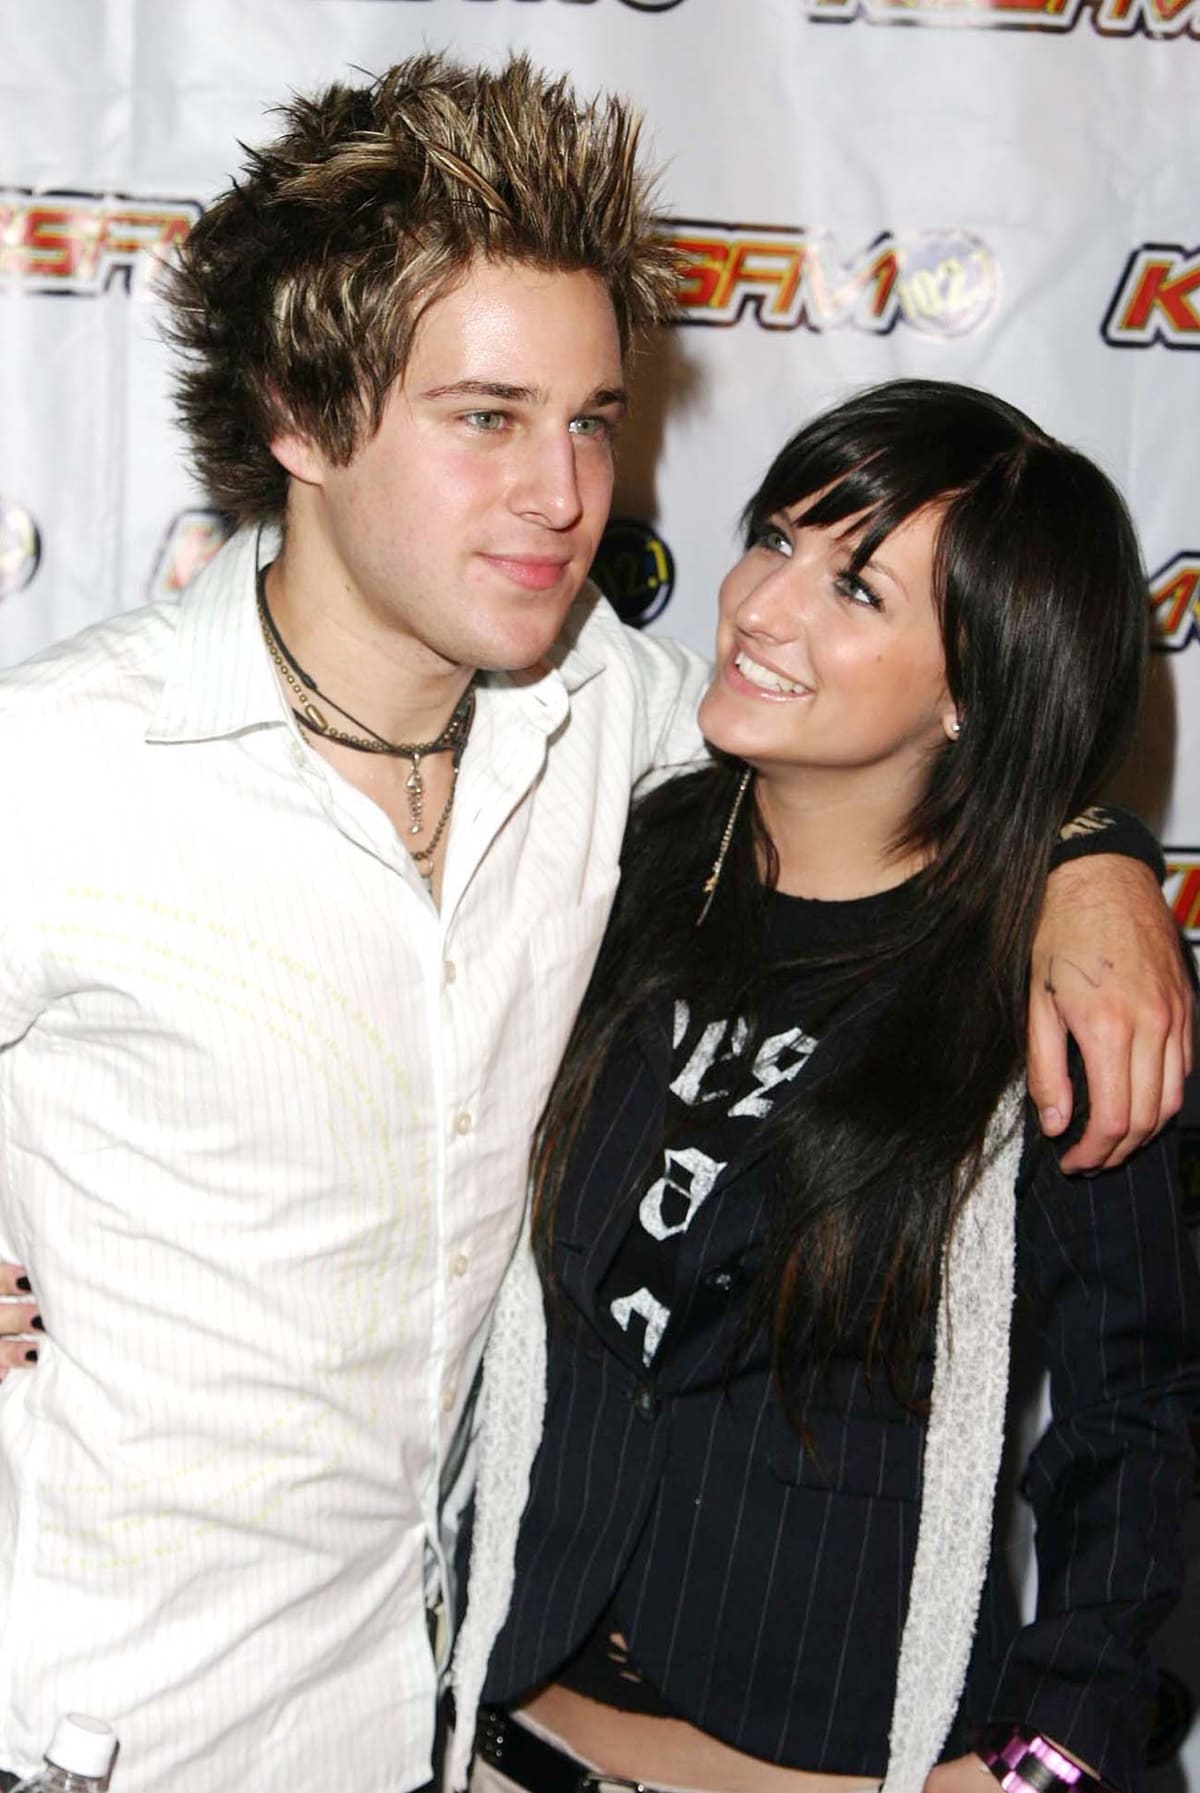 Ashlee Simpson and American musician Ryan Cabrera dated from January 2004 to August 2005